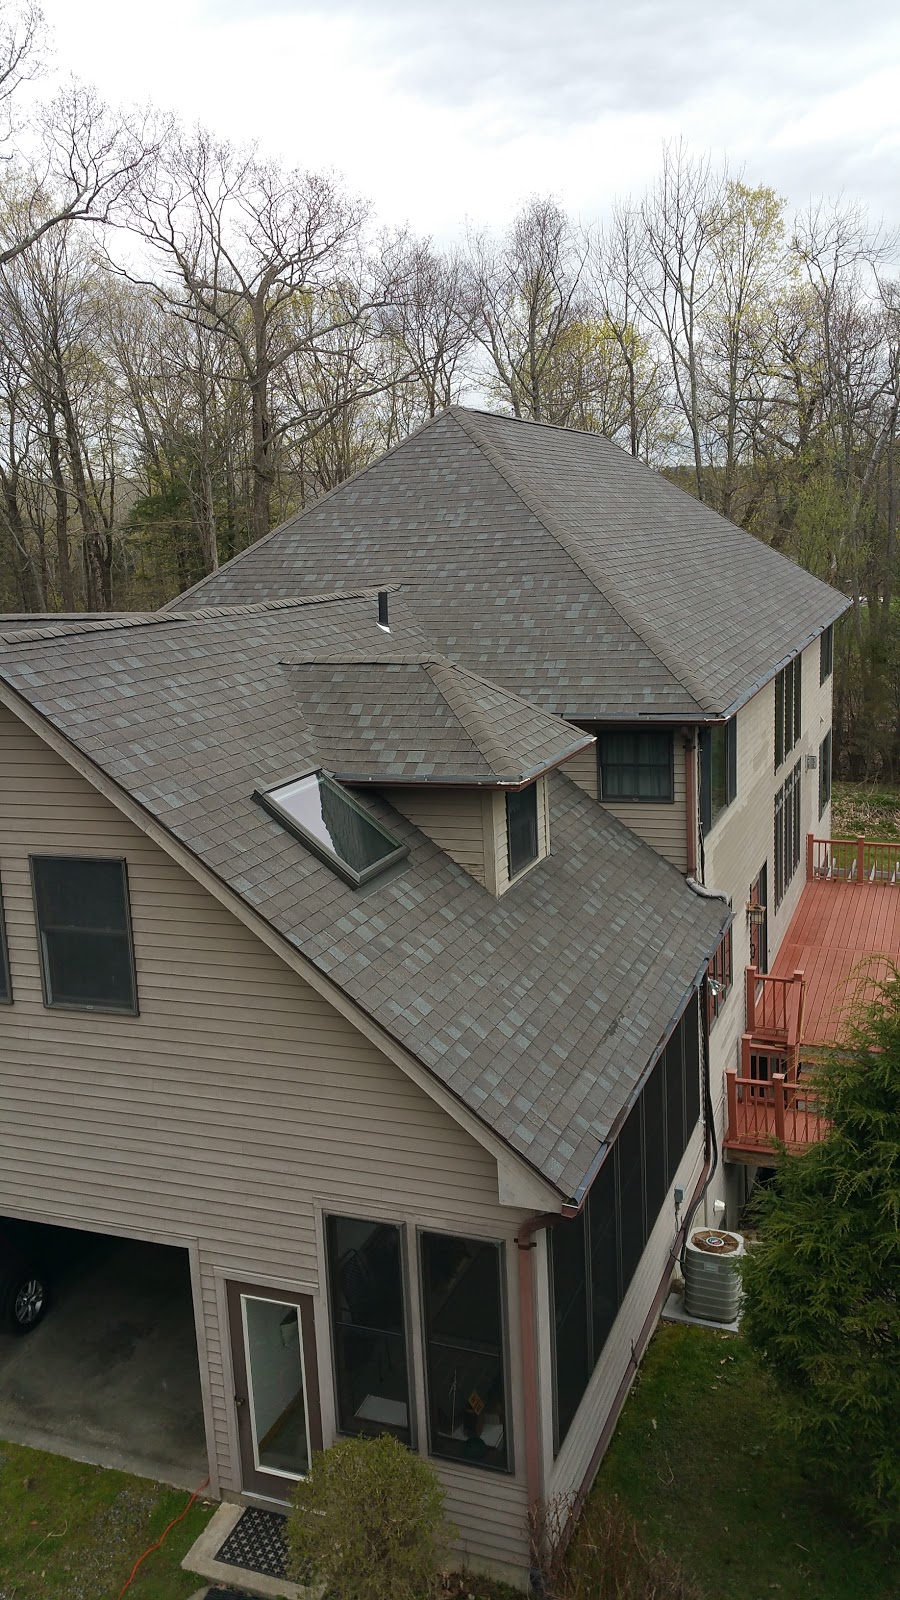 Klaus Roofing Systems by J Smegal | 449 Pittsfield Rd # 201, Lenox, MA 01240 | Phone: (413) 655-7663